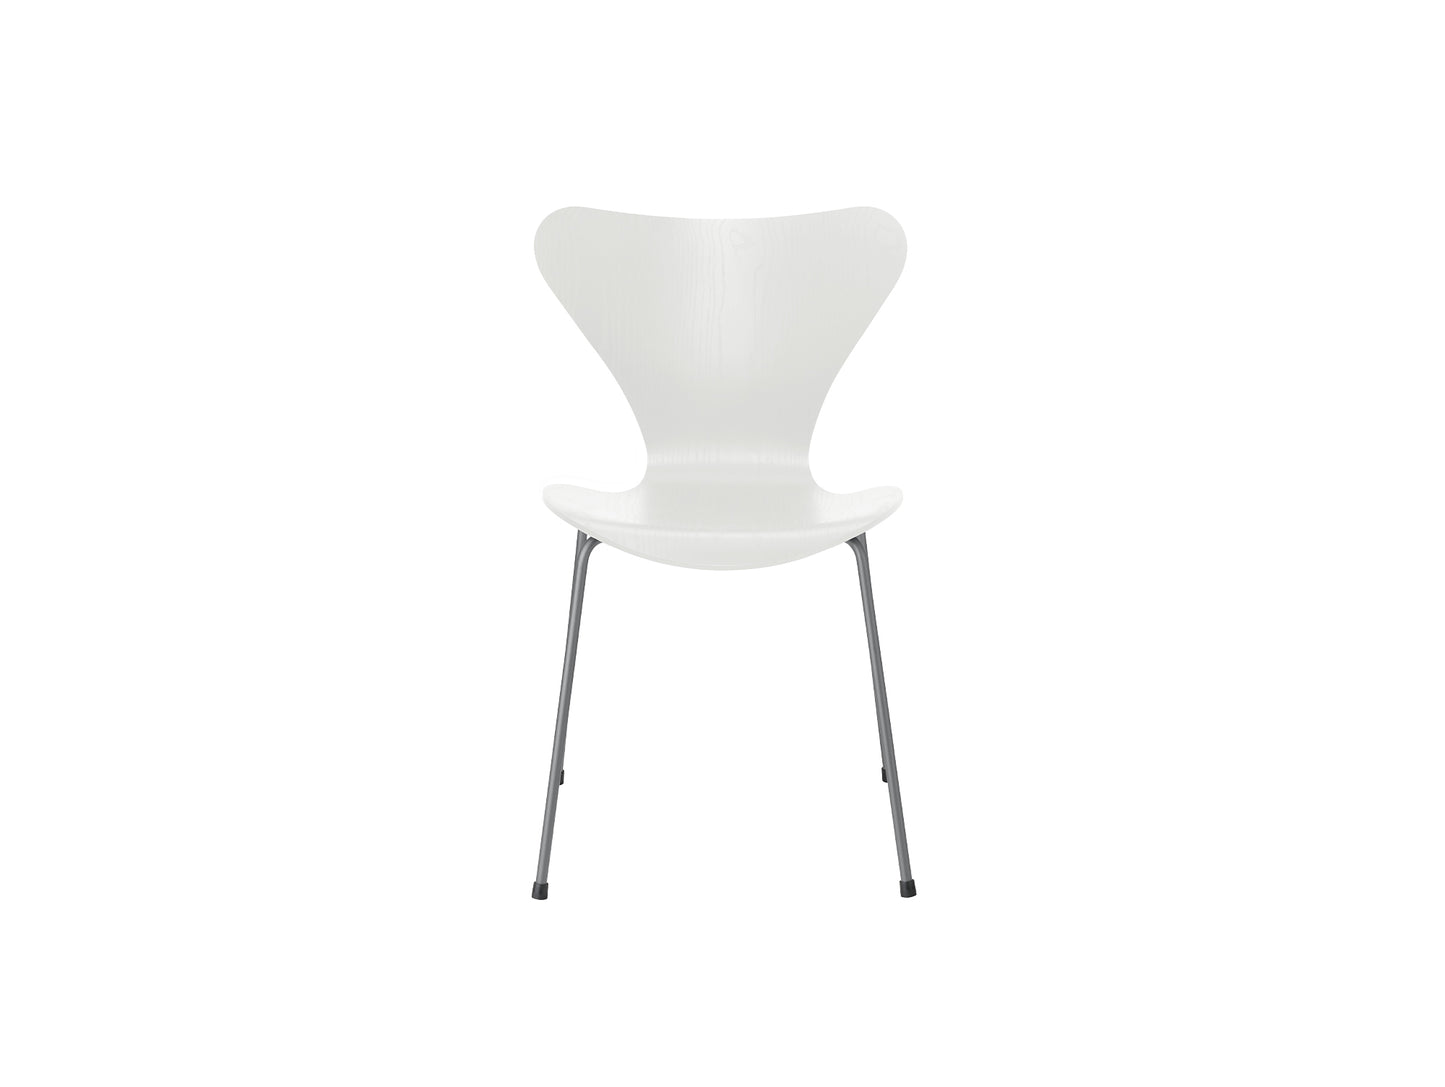 Series 7™ 3107 Dining Chair by Fritz Hansen - White Coloured Ash Veneer Shell / Silver Grey Steel